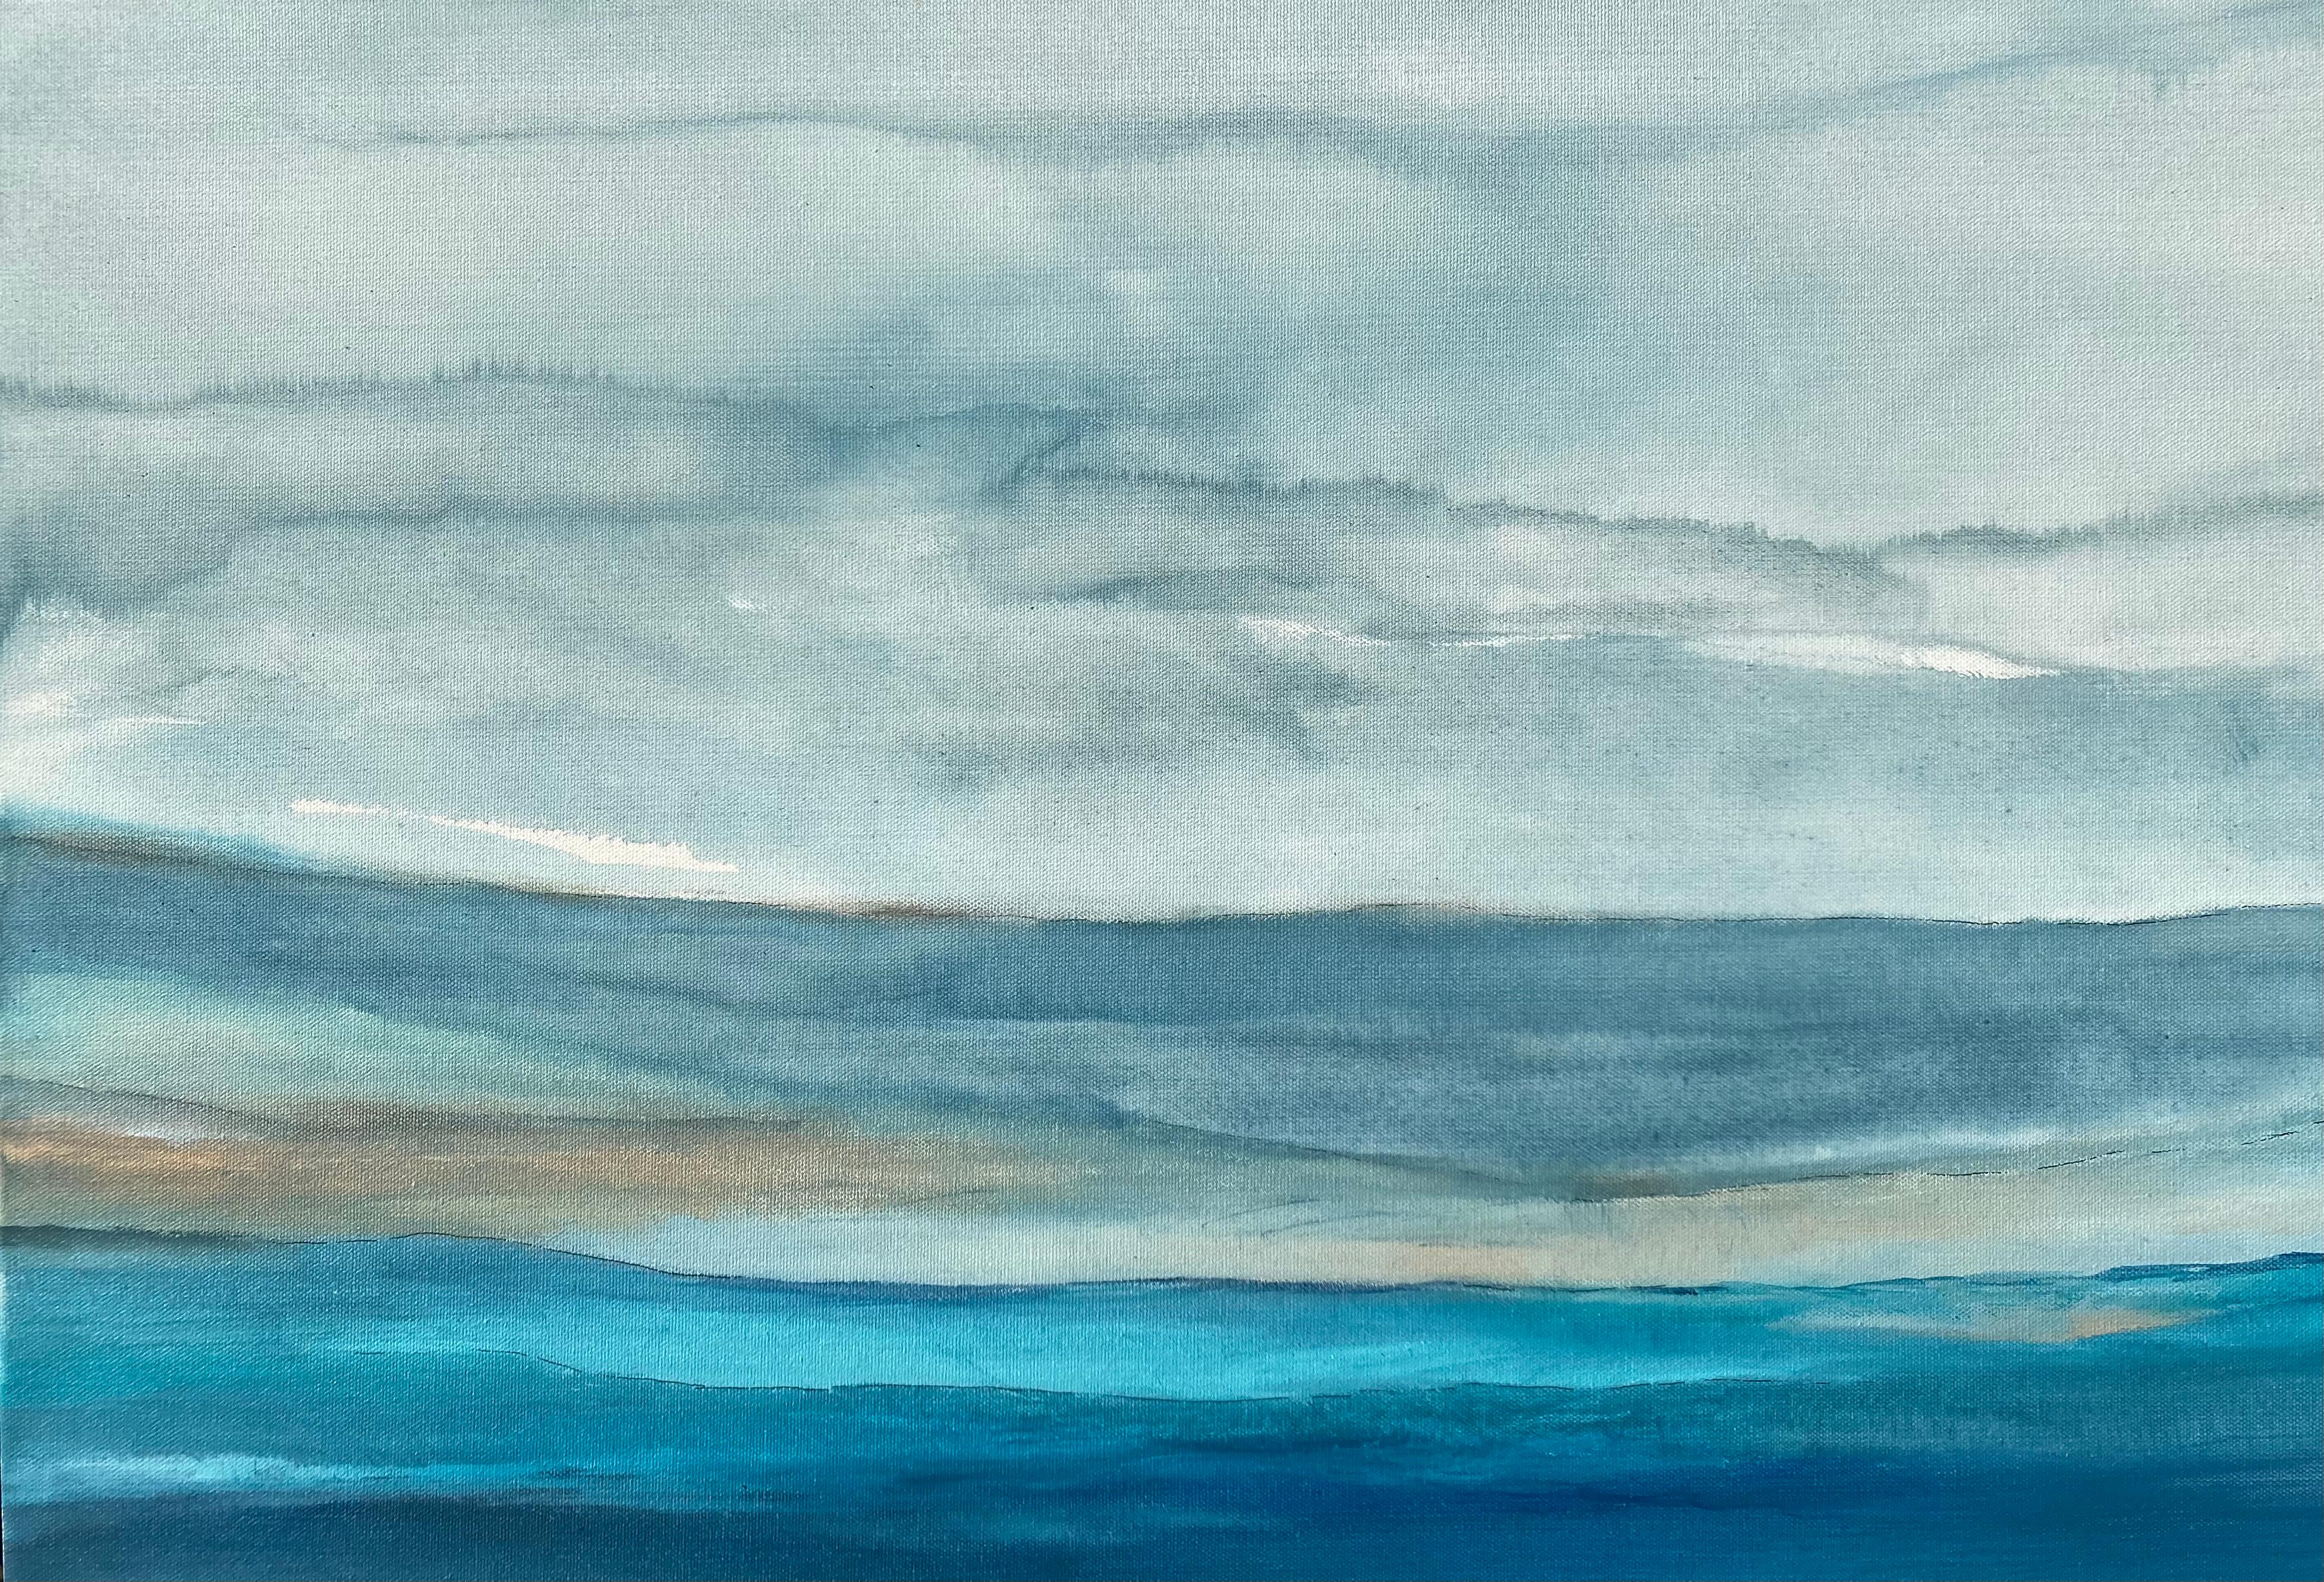 <p>Artist Comments<br>Artist Alicia Dunn presents a wide lens dreamy landscape in an abstraction of mild turquoise and pale blue tones. Cool blue gradients expand into a panoramic scenery. Subtle rays of light peek through the rhythmic arrangement